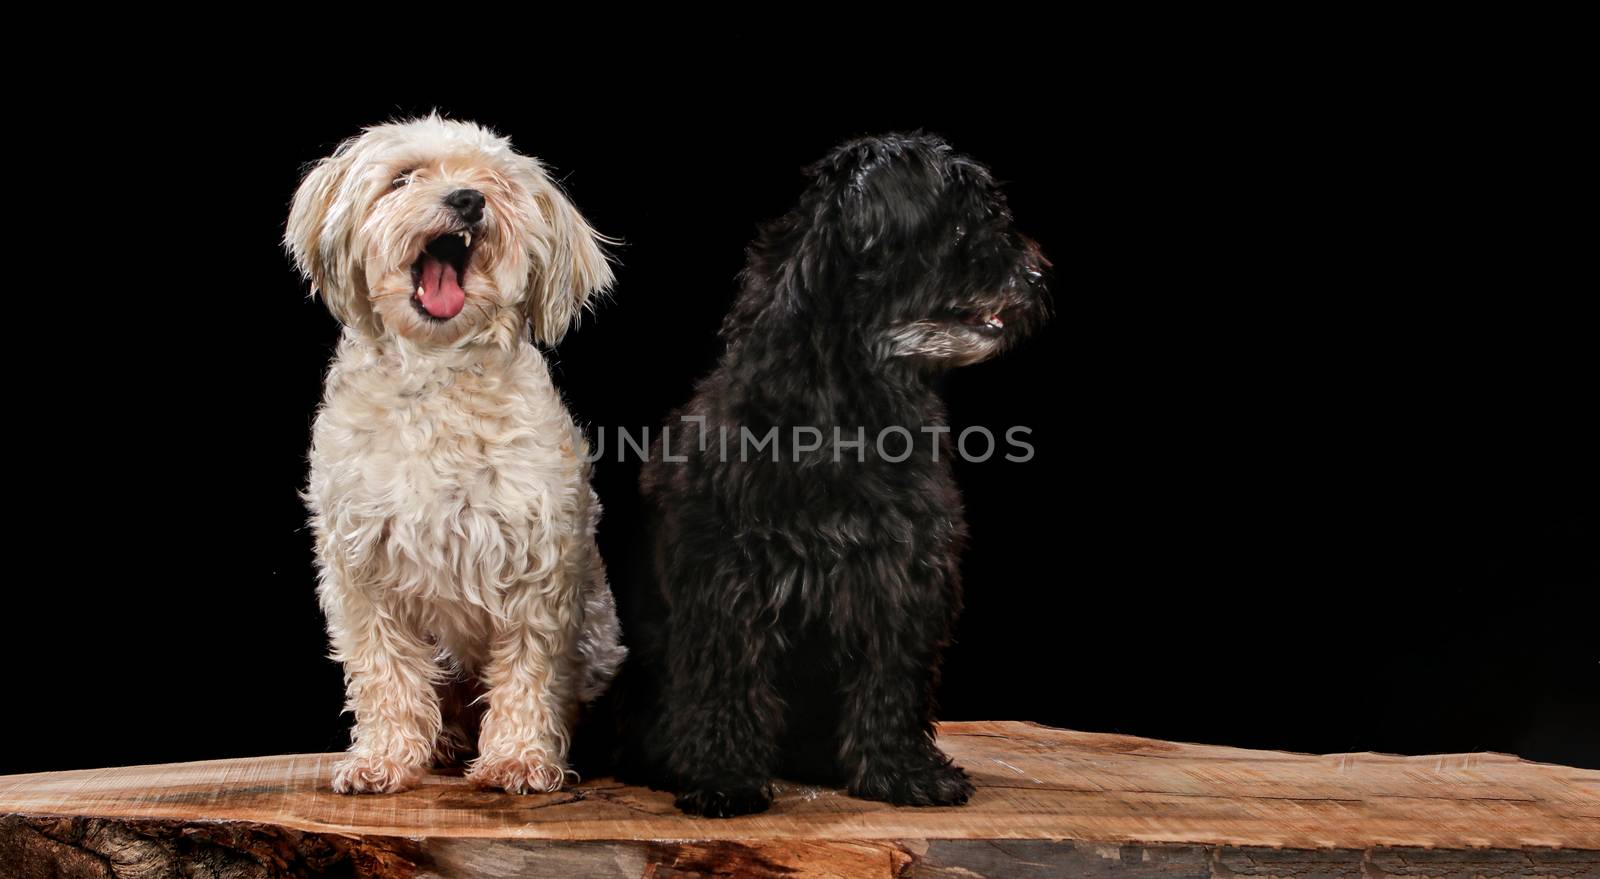 Two dogs on a wooden plank before a black background with open mouth